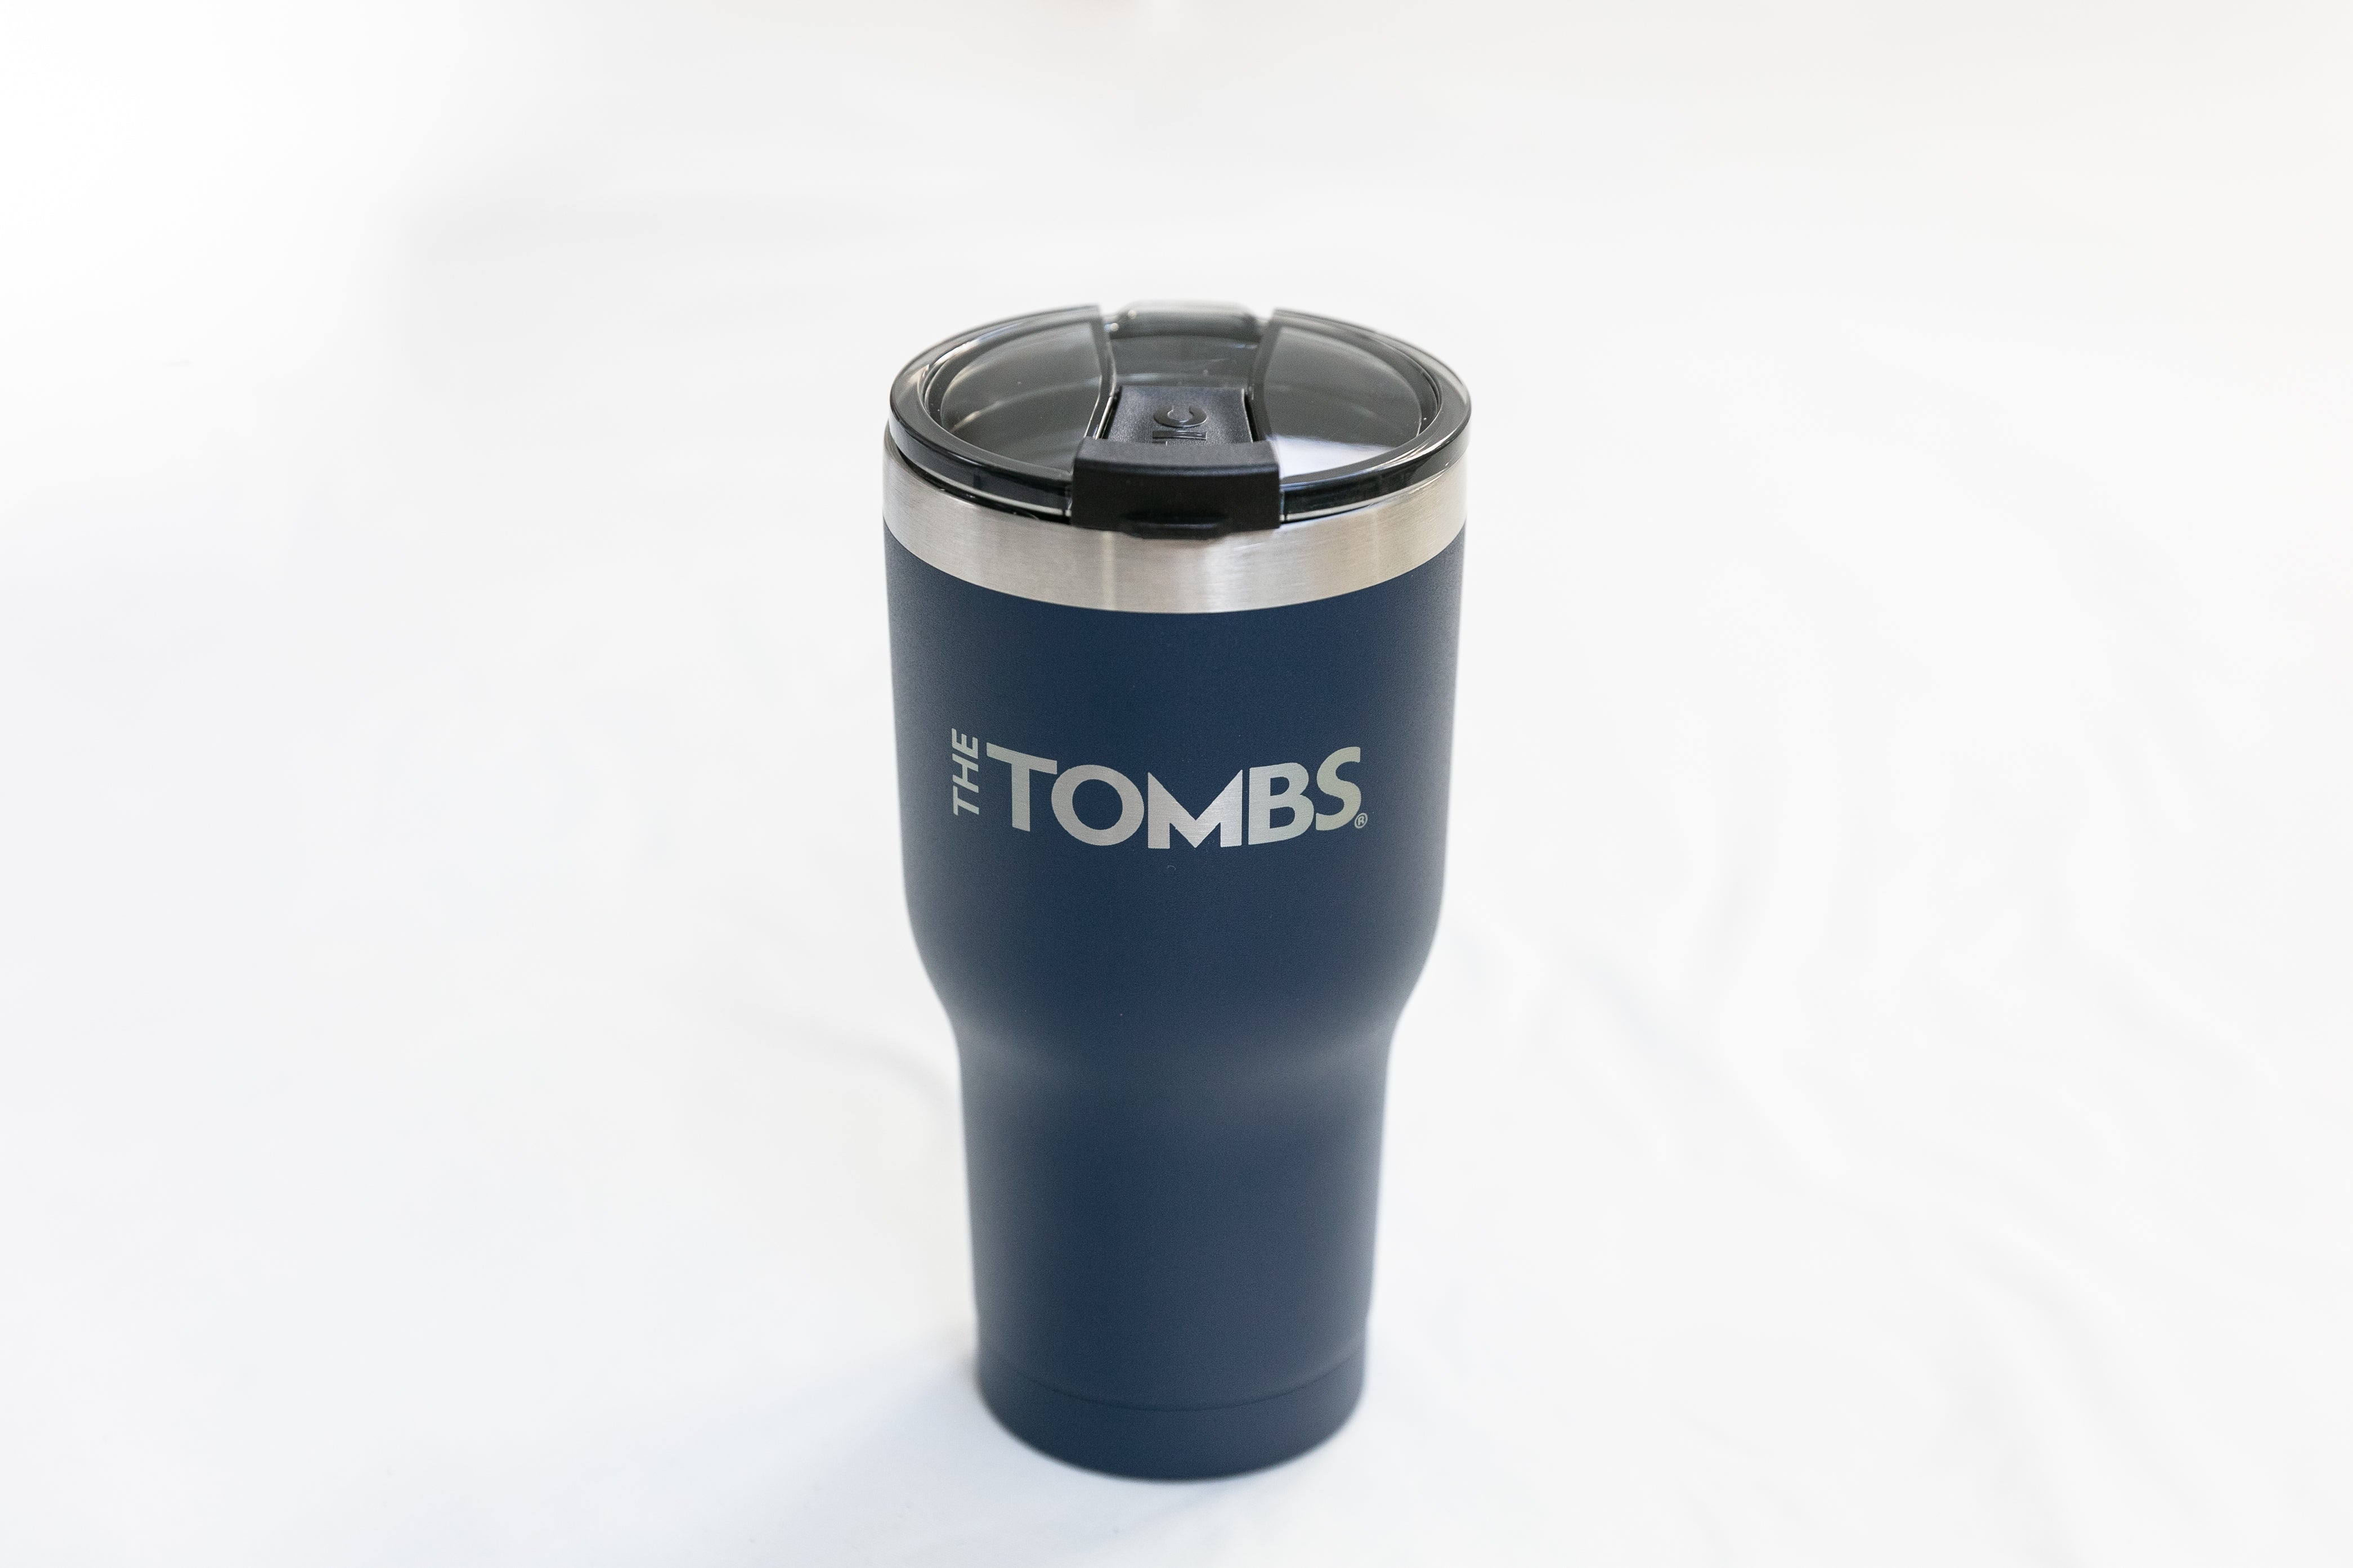 The Tombs Limited Edition RTIC 20-oz Tumbler